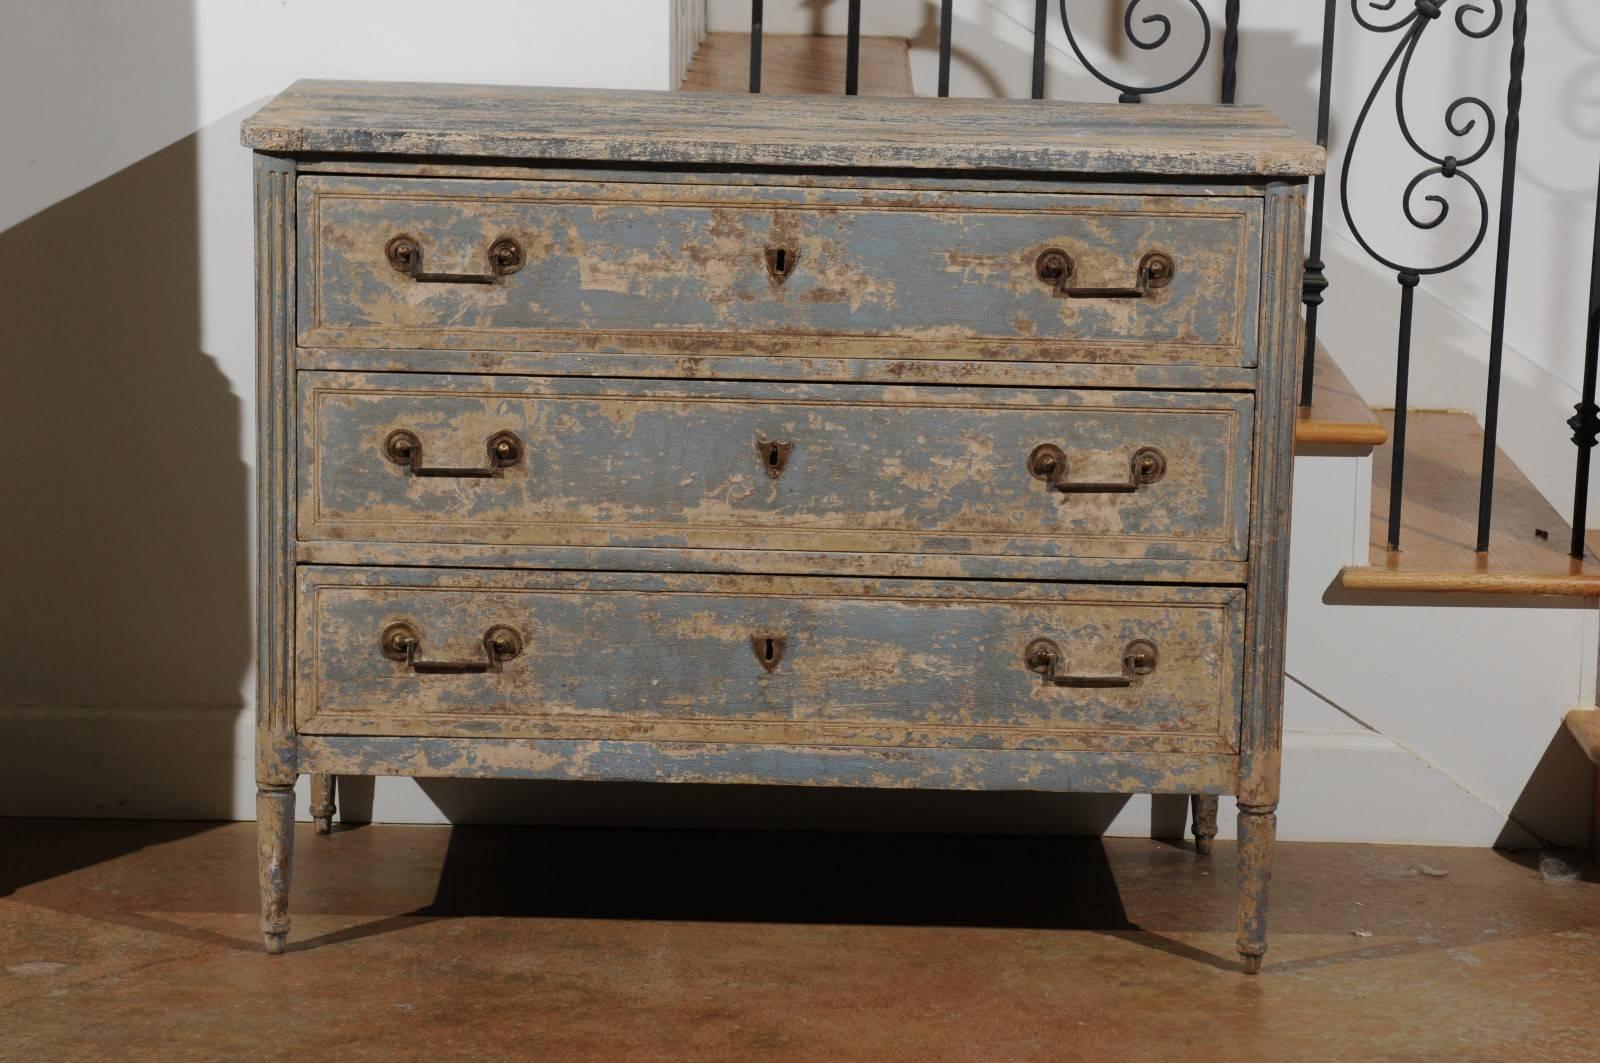 A Swedish Gustavian period blue painted three-drawer commode with fluted side posts and cylindrical feet from the early 19th century. This Scandinavian chest-of-drawers features a rectangular top with rounded corners in the front, sitting above